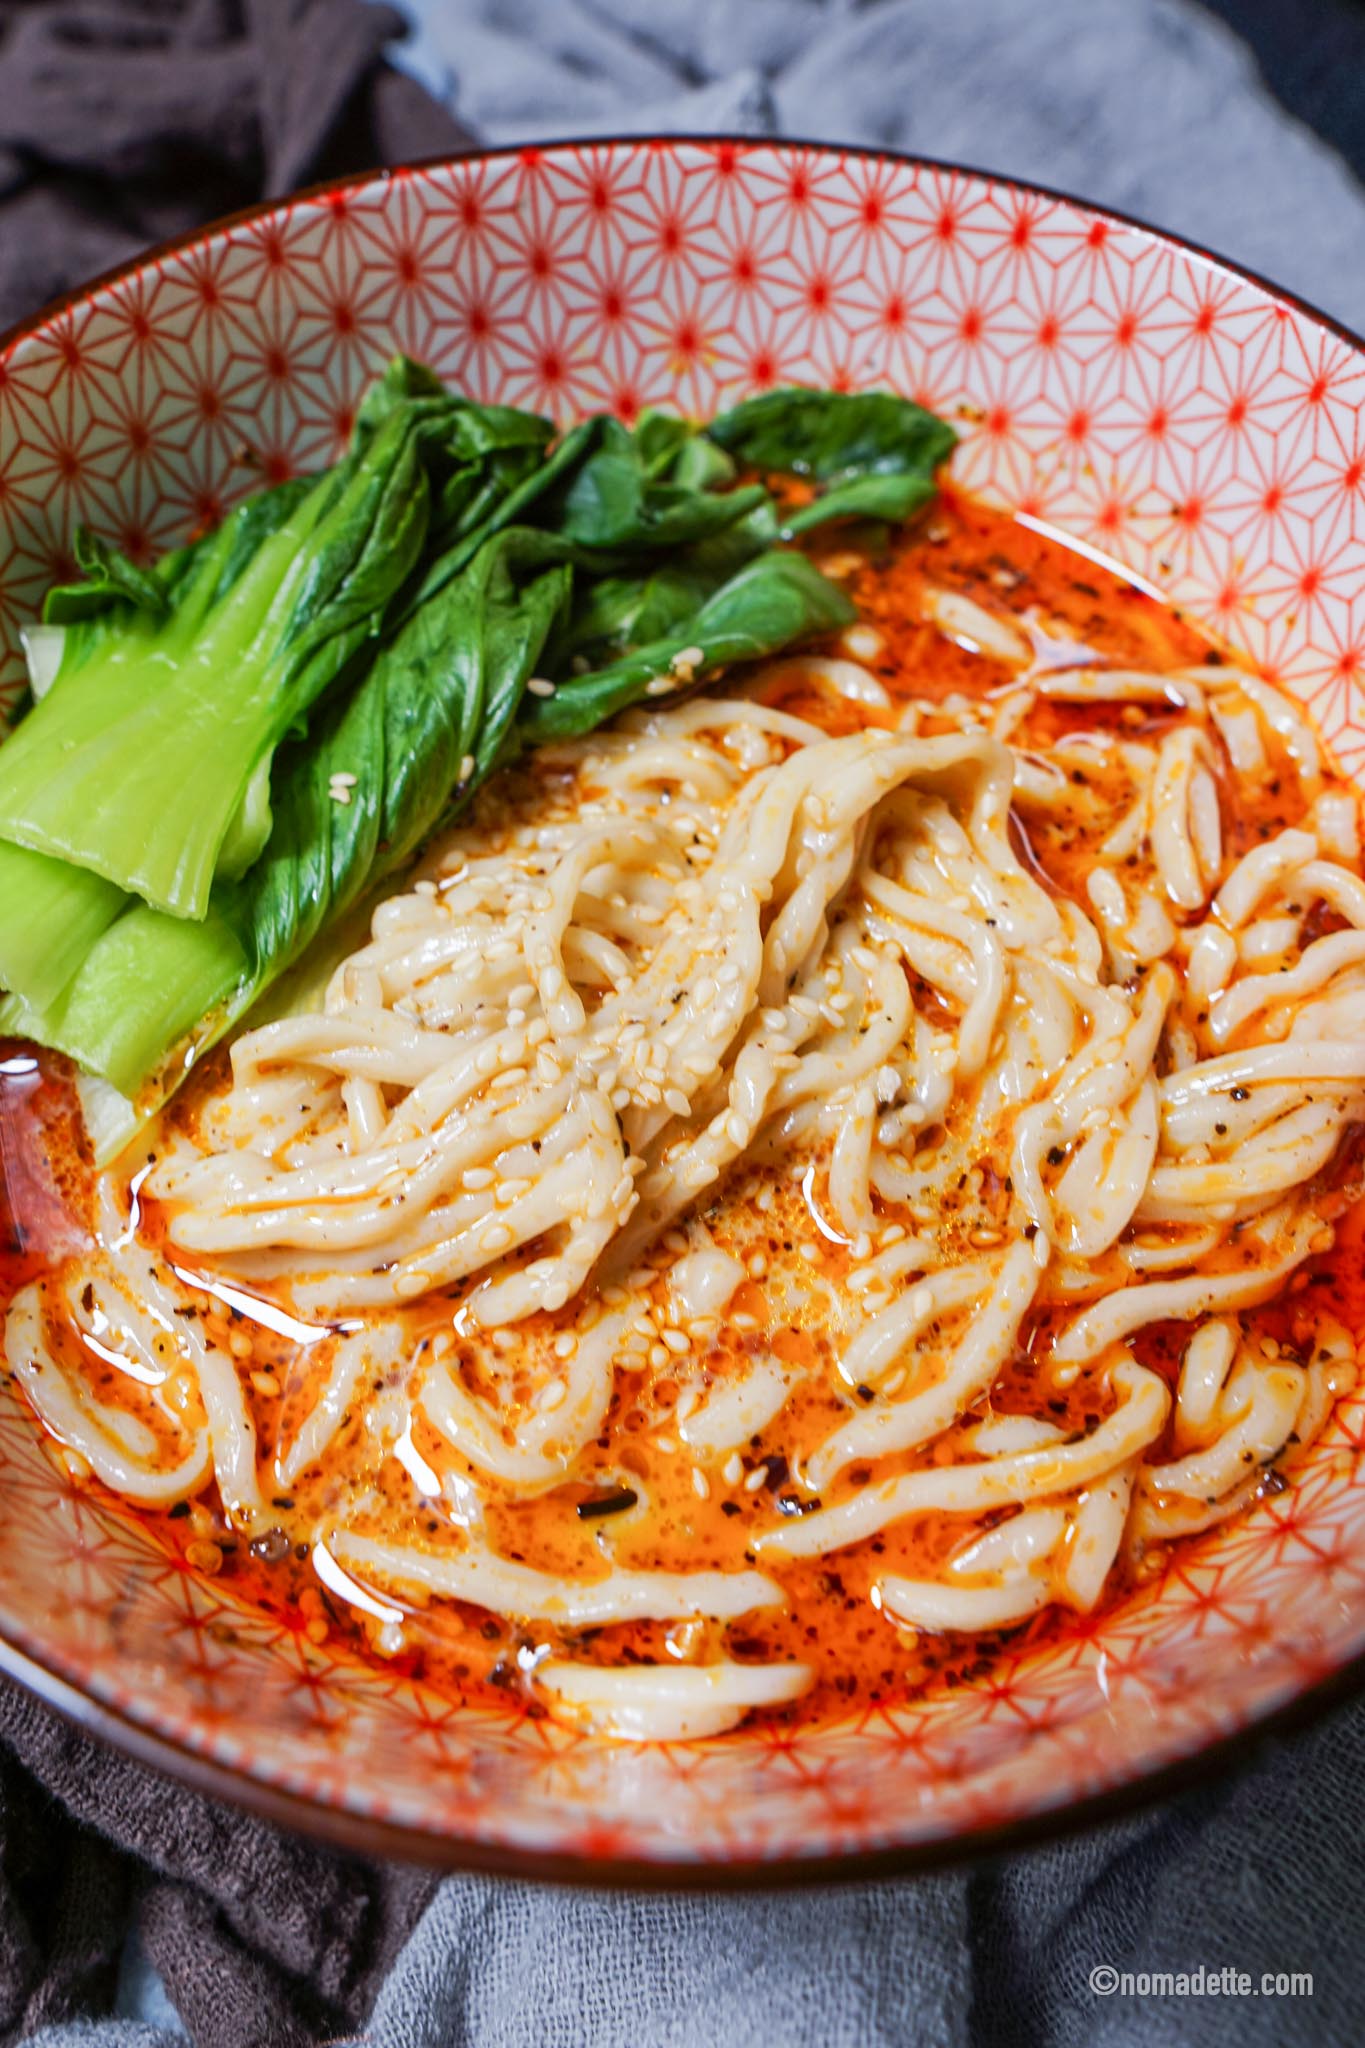 Spicy Sesame Noodles in 5 Minutes!